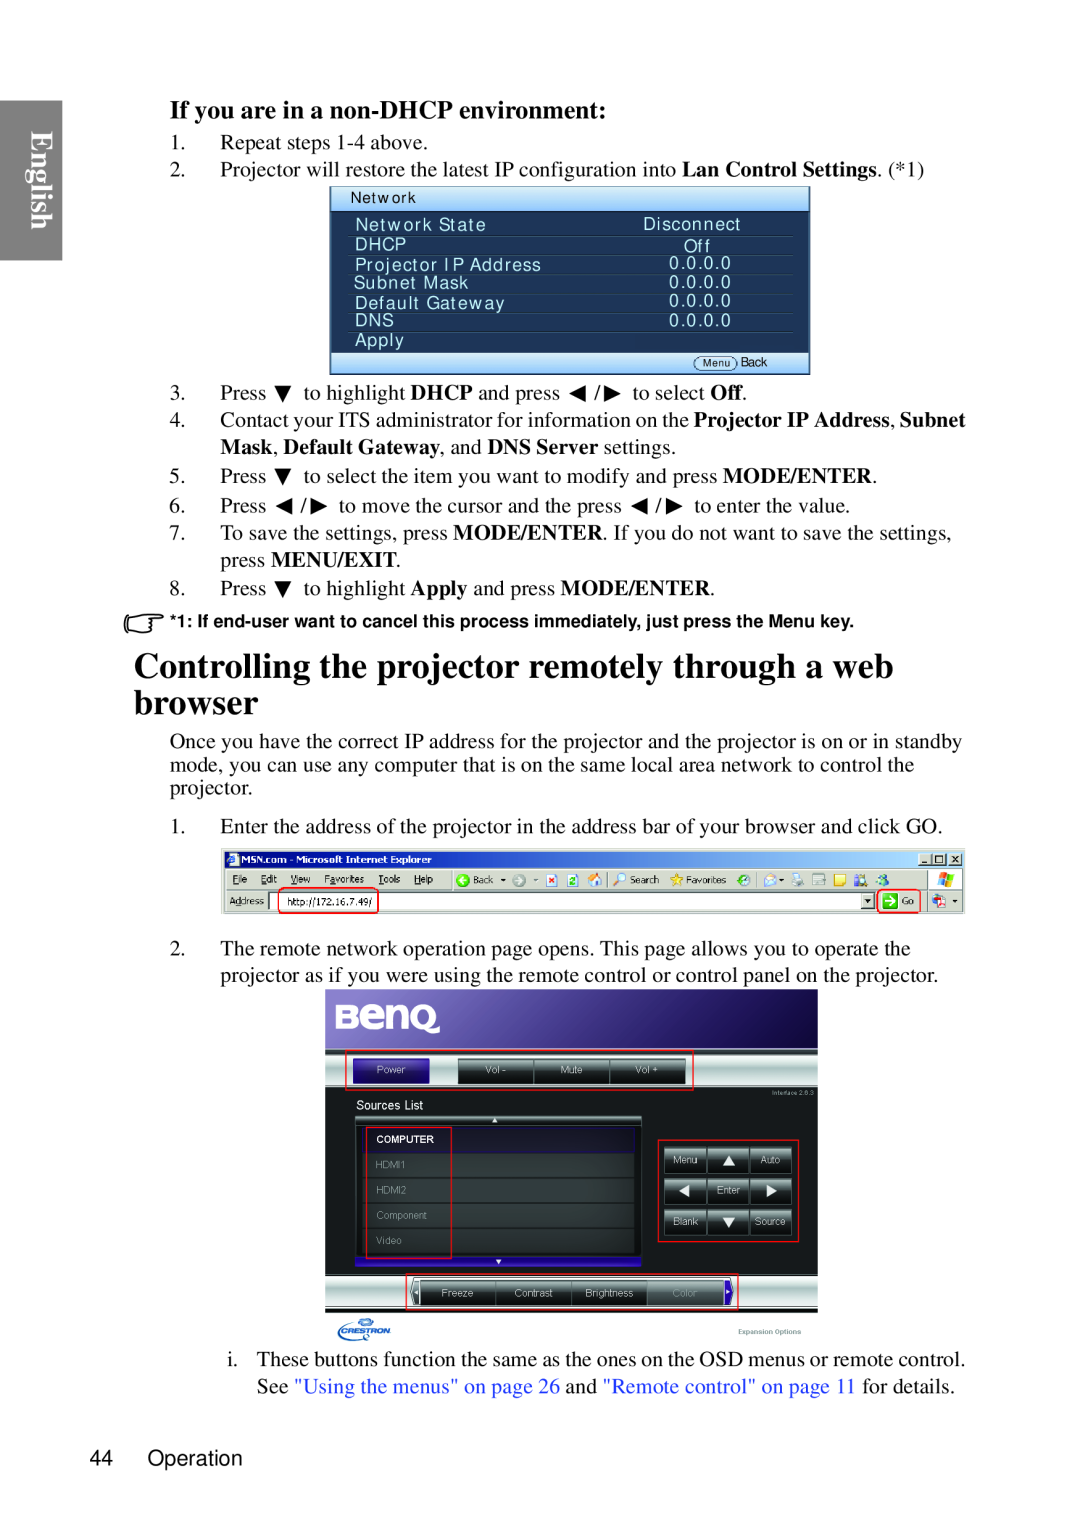 BenQ SP840 Controlling the projector remotely through a web browser, If you are in a non-DHCP environment, English 